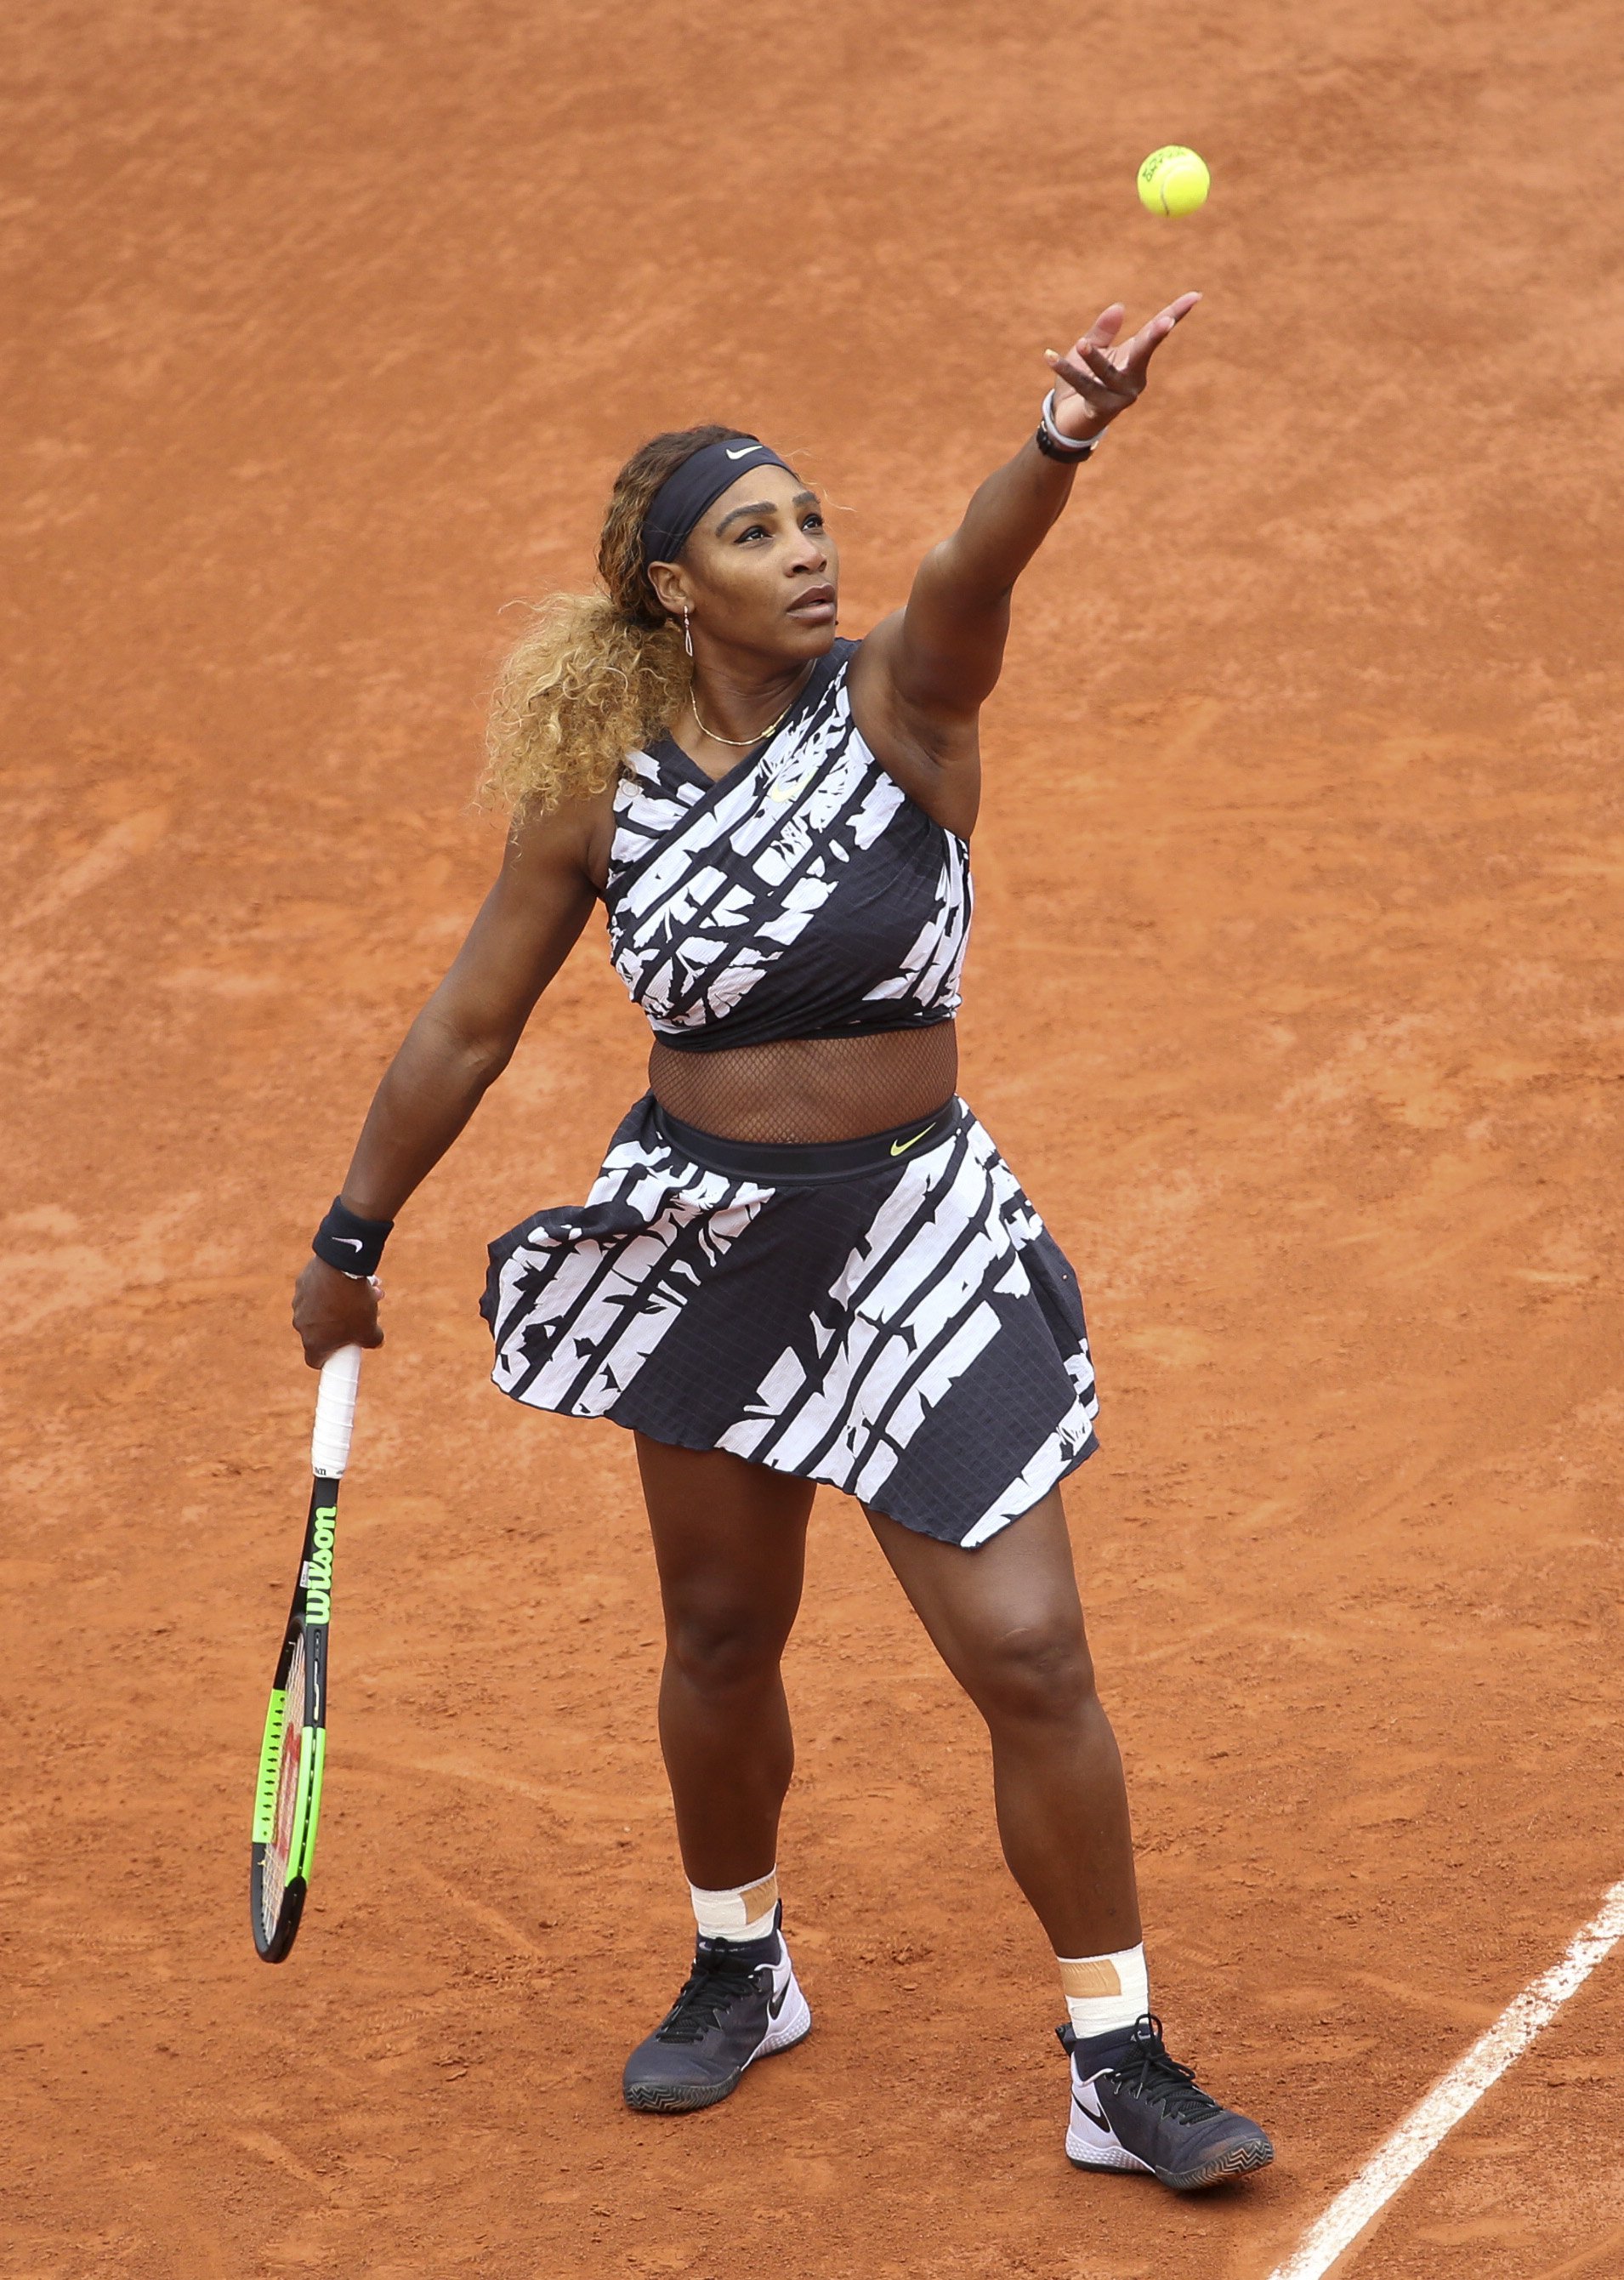 Serena Williams serves the ball at the French Open in Paris, France in June 2019. | Photo: Getty Images